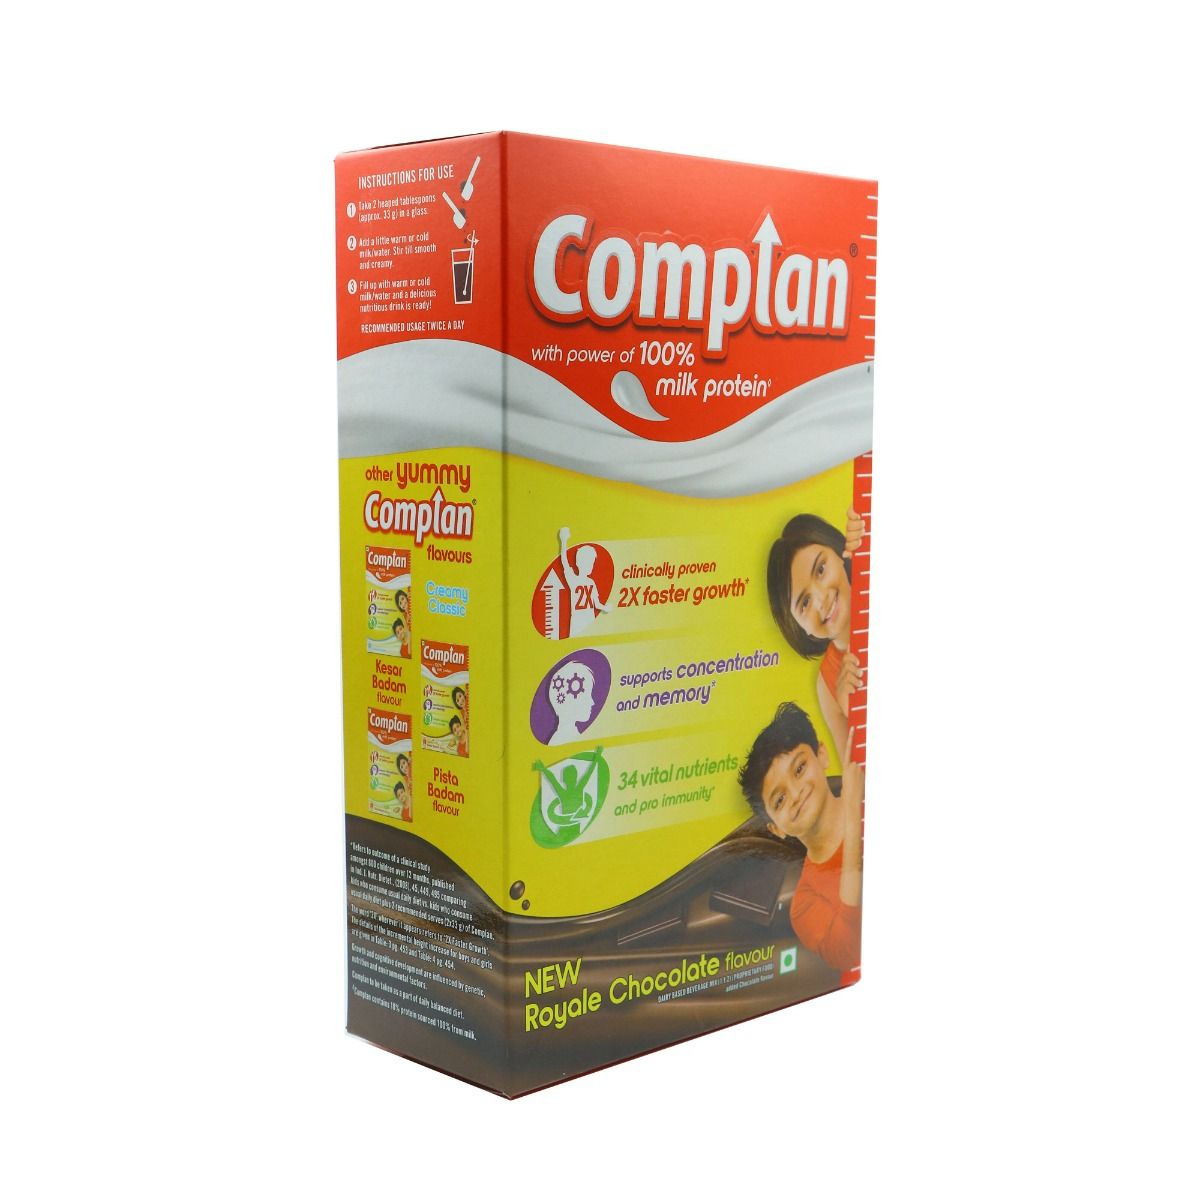 Buy Complan Royale Chocolate Flavour Nutrition Drink Powder, 1 kg Refill Pack Online